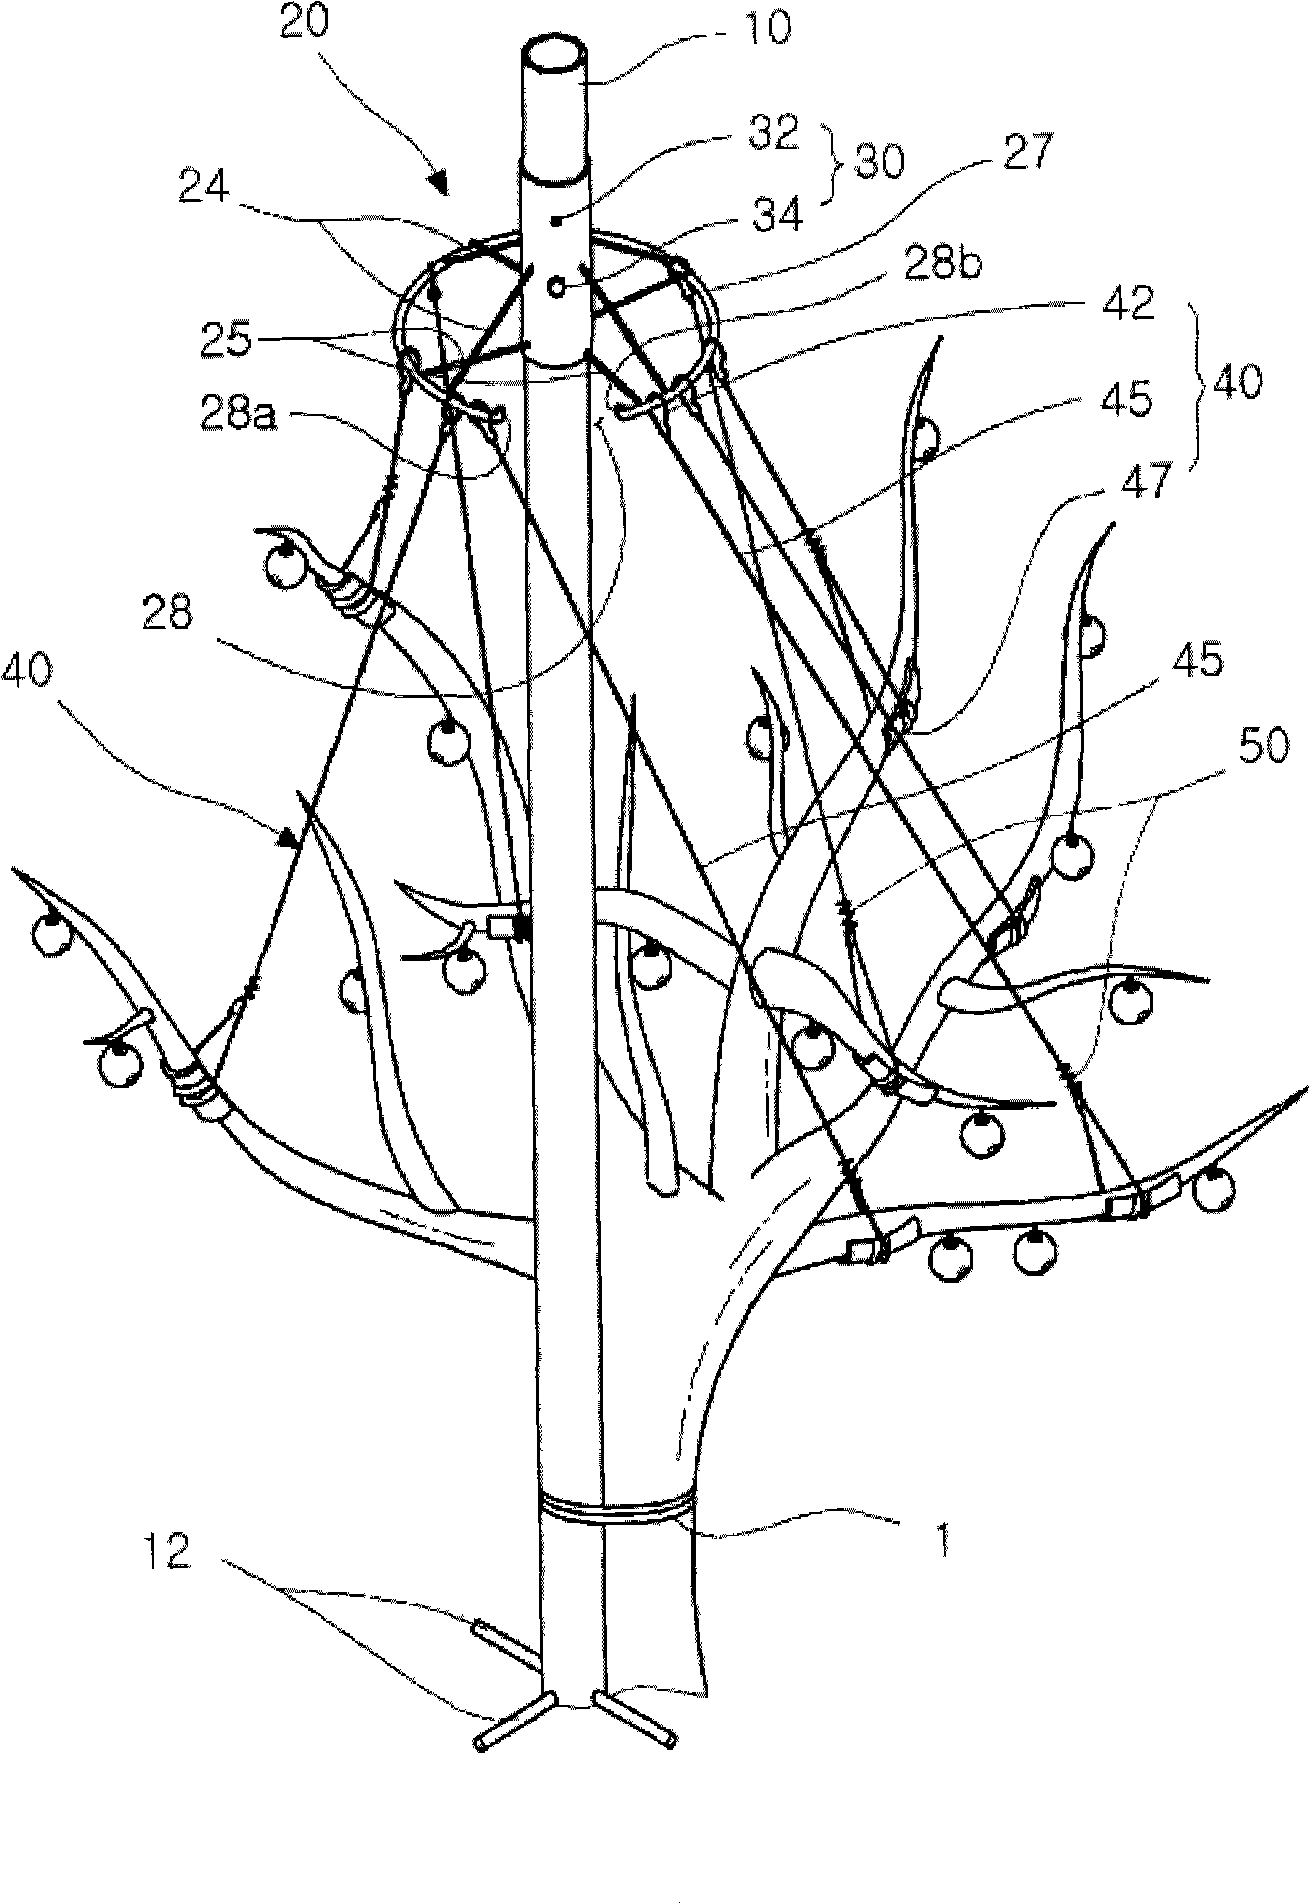 Tree branch supporting device